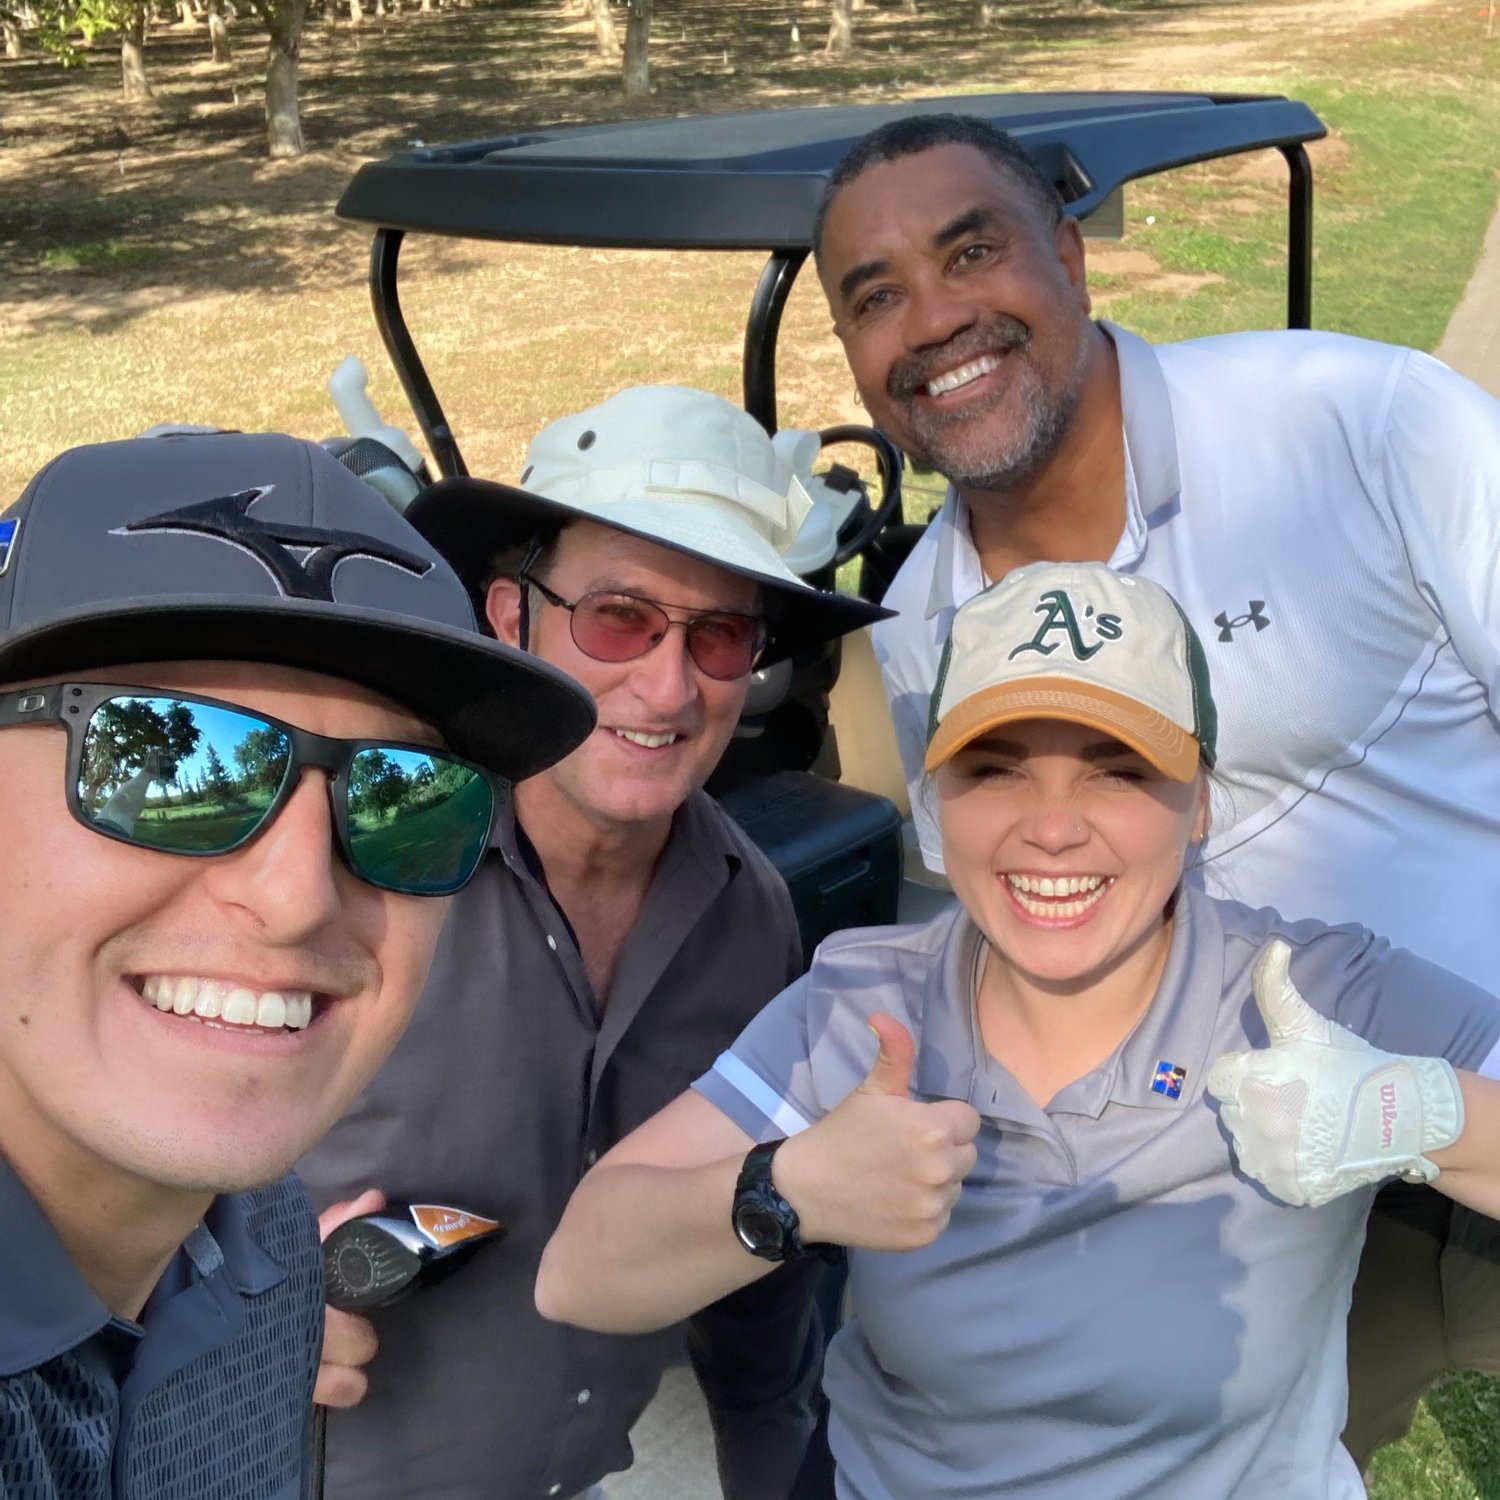 TEAMS OF 4: Justice For Trevor Charity Golf Tournament — The Trevor ...